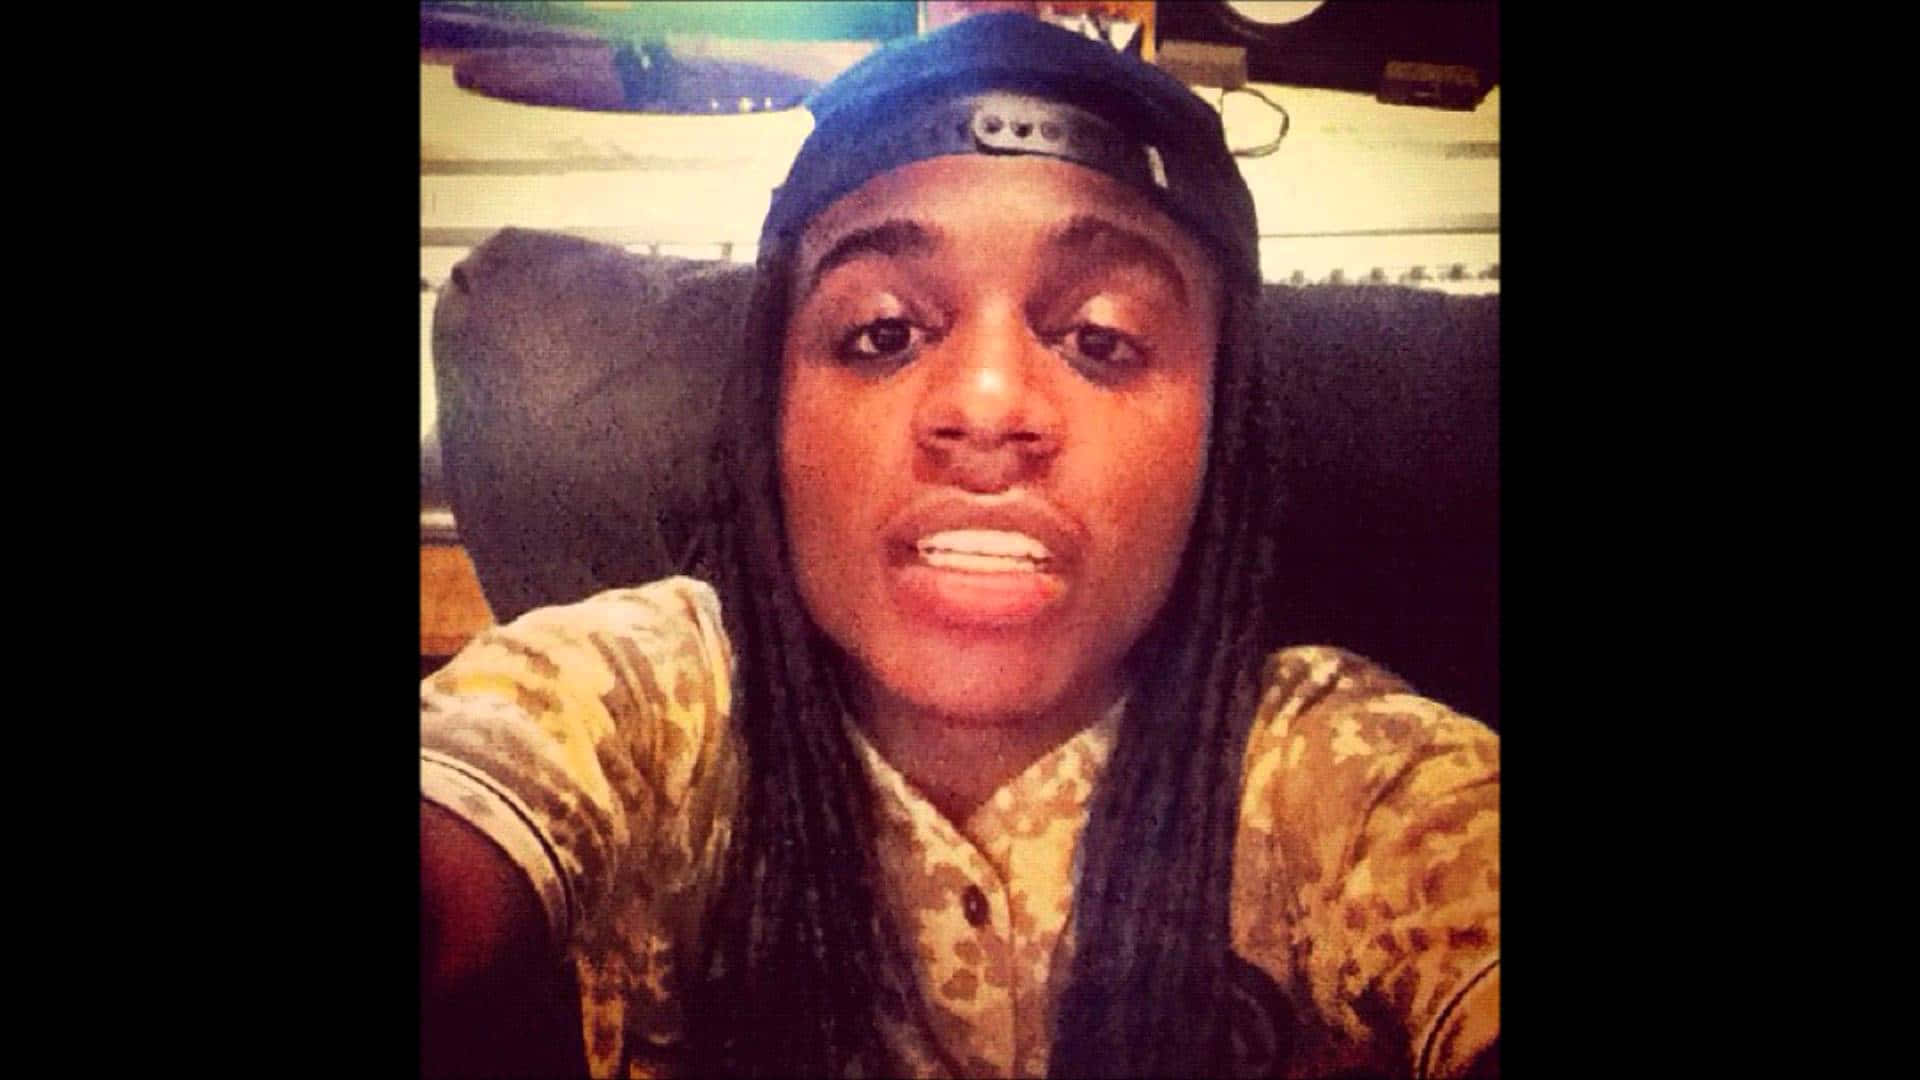 Jacquees bringing the heat Wallpaper